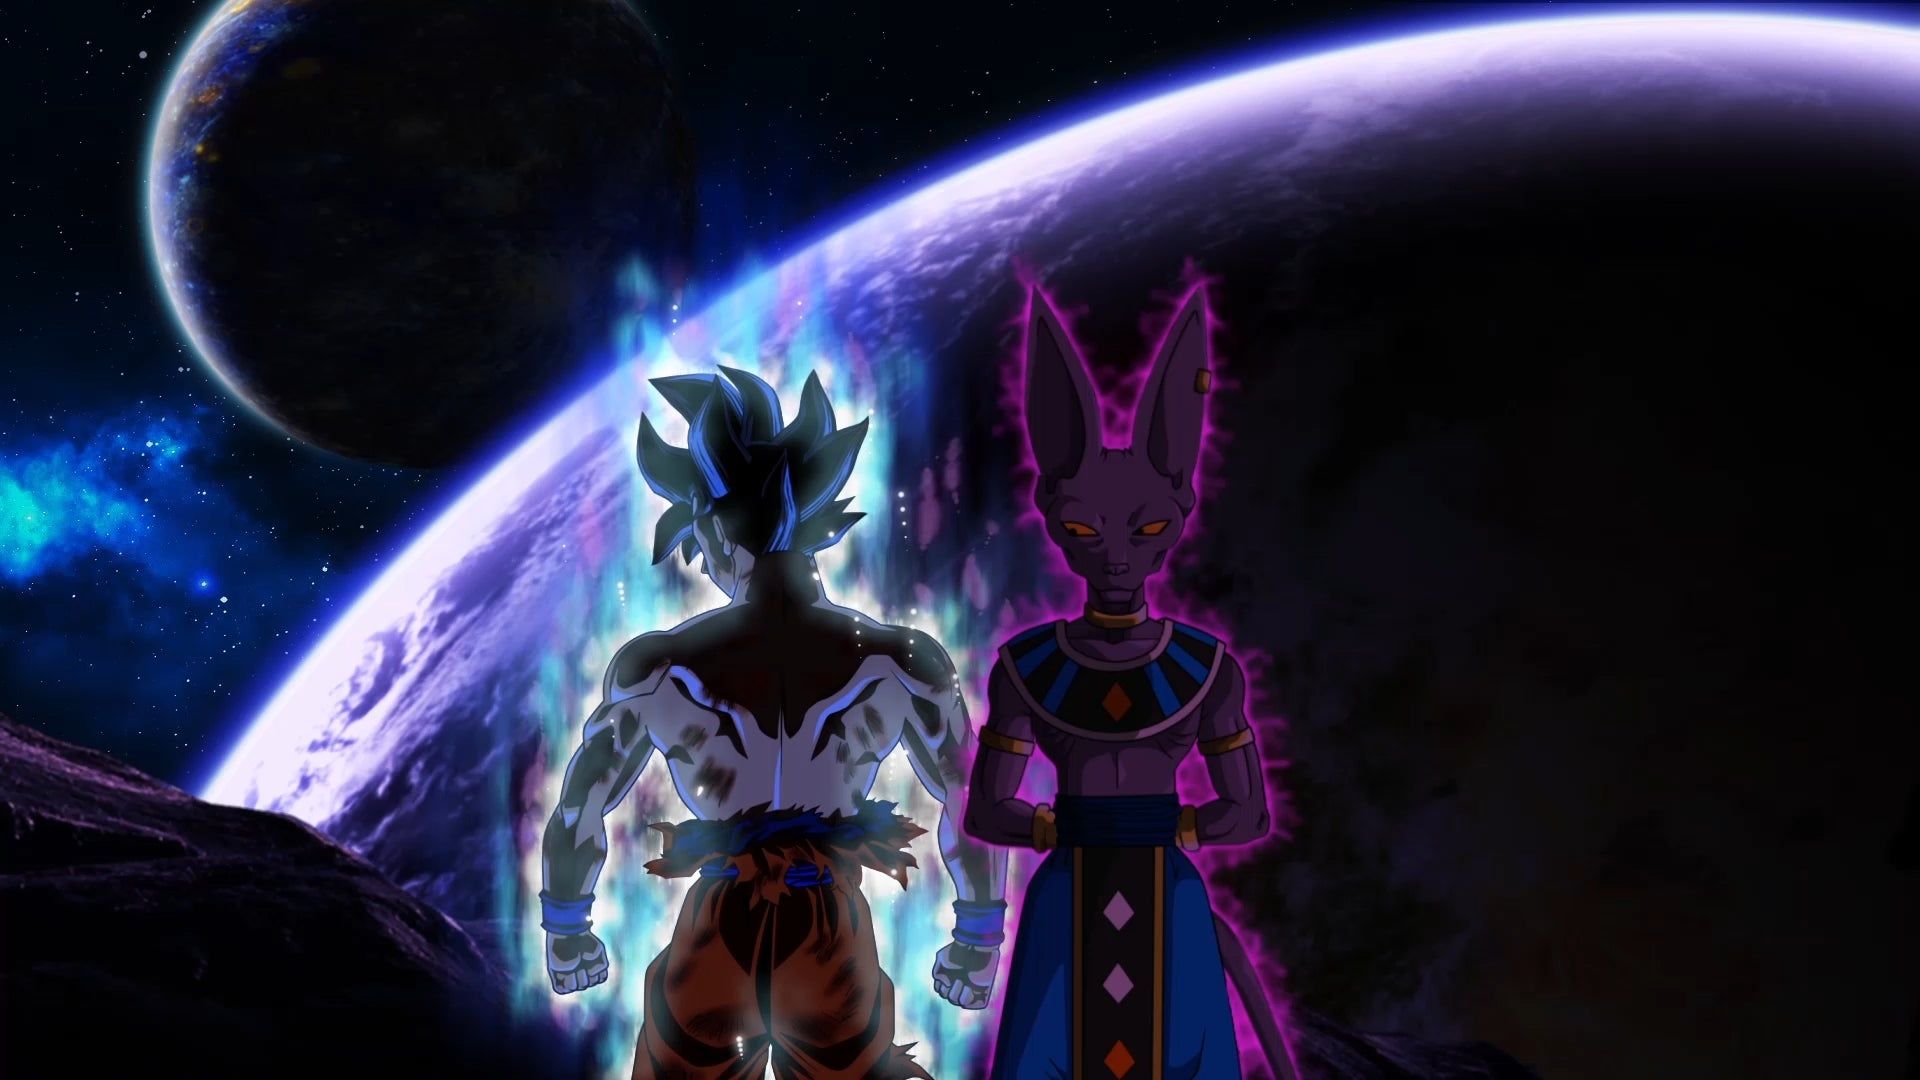 Second attempt at making an animated wallpaper (Goku Vs Beerus: Rematch)